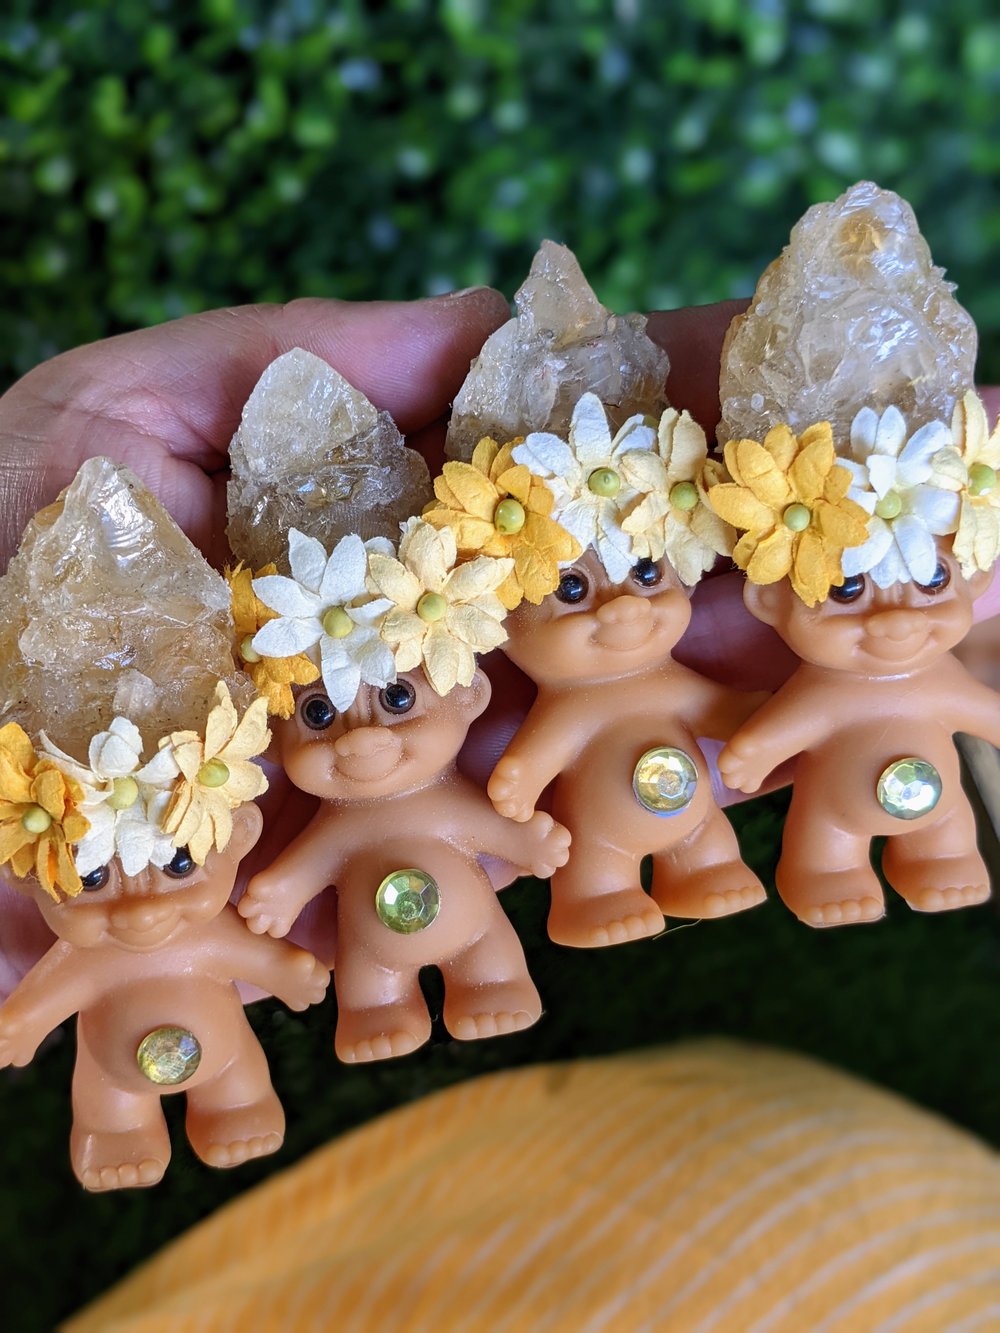 Citrine "Golden Amethyst" Crystal Troll Shorty with Mulberry Flower Crown 3.5"